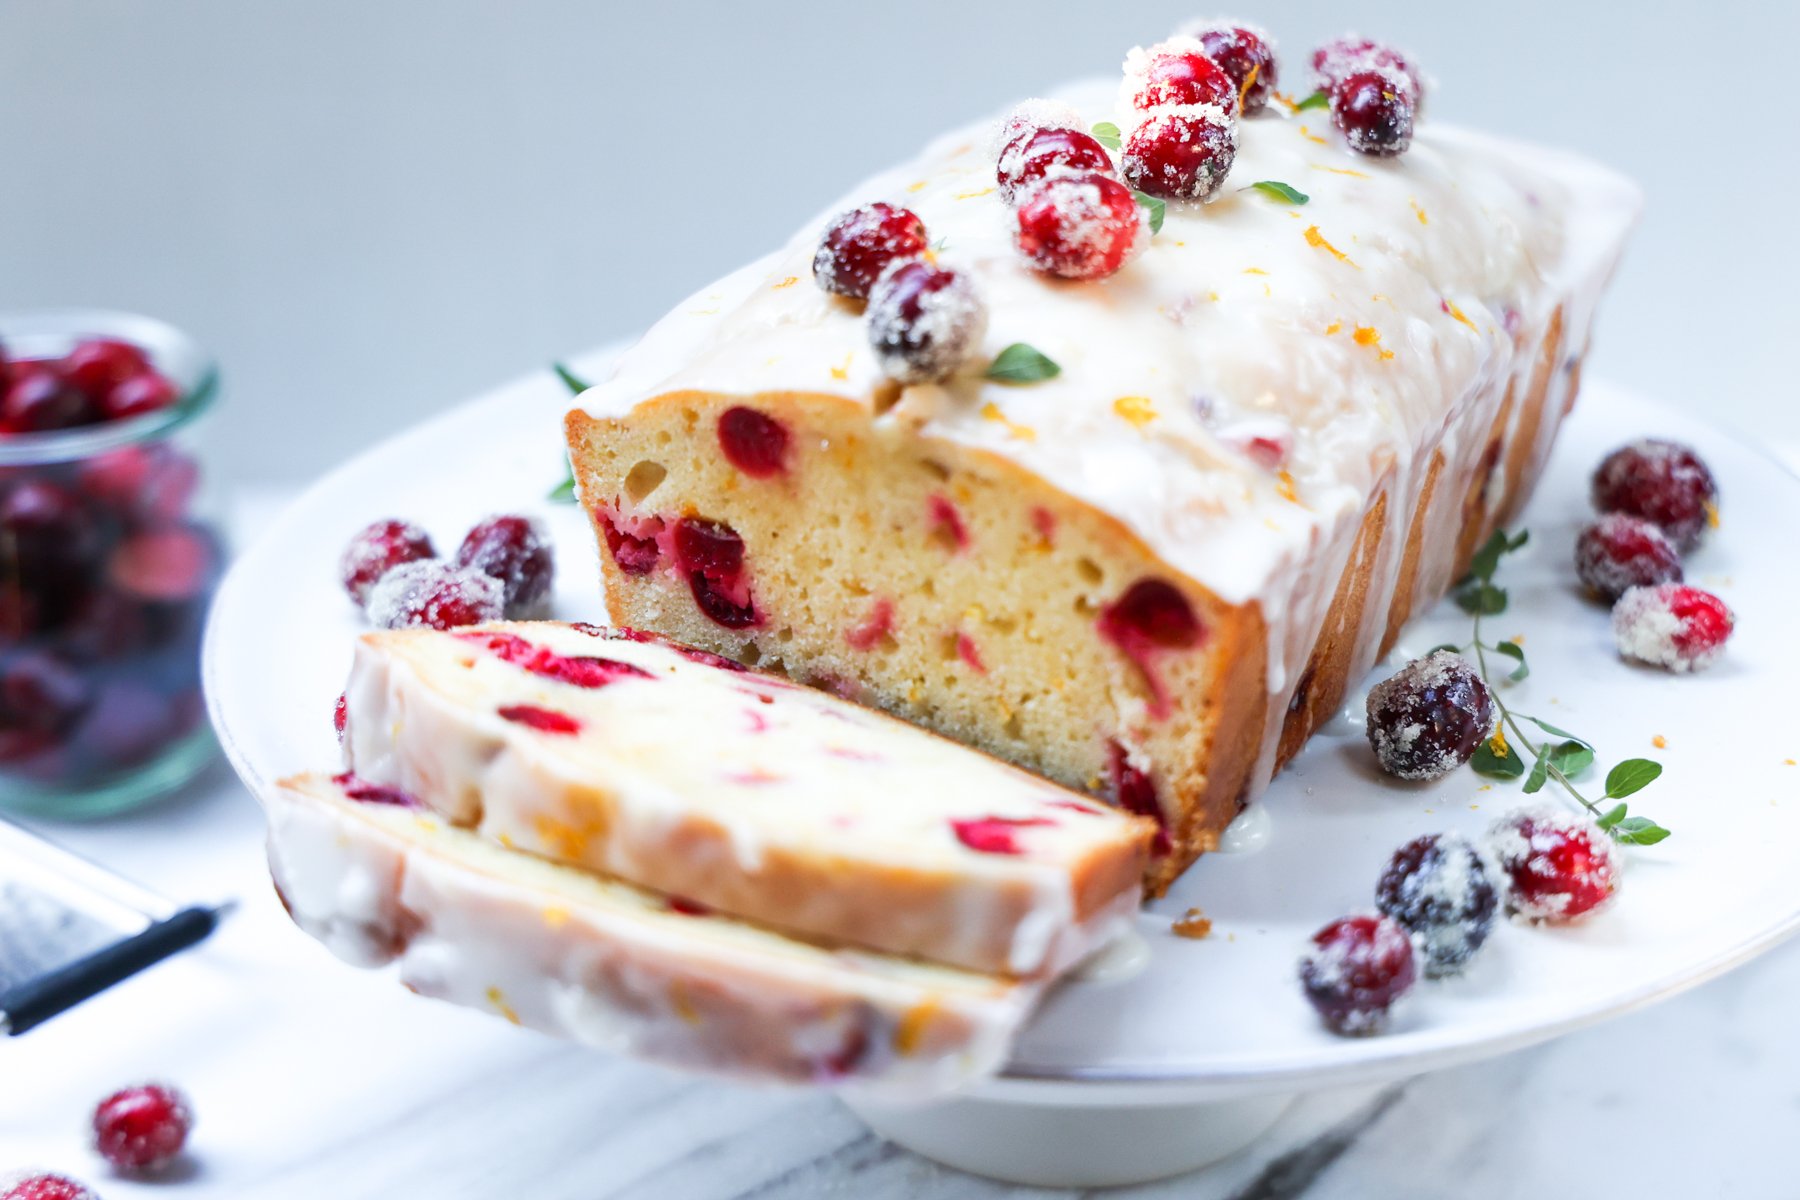 Cranberry Orange loaf cake on cake stand with 2 slices  and decorated with sugared cranberries.